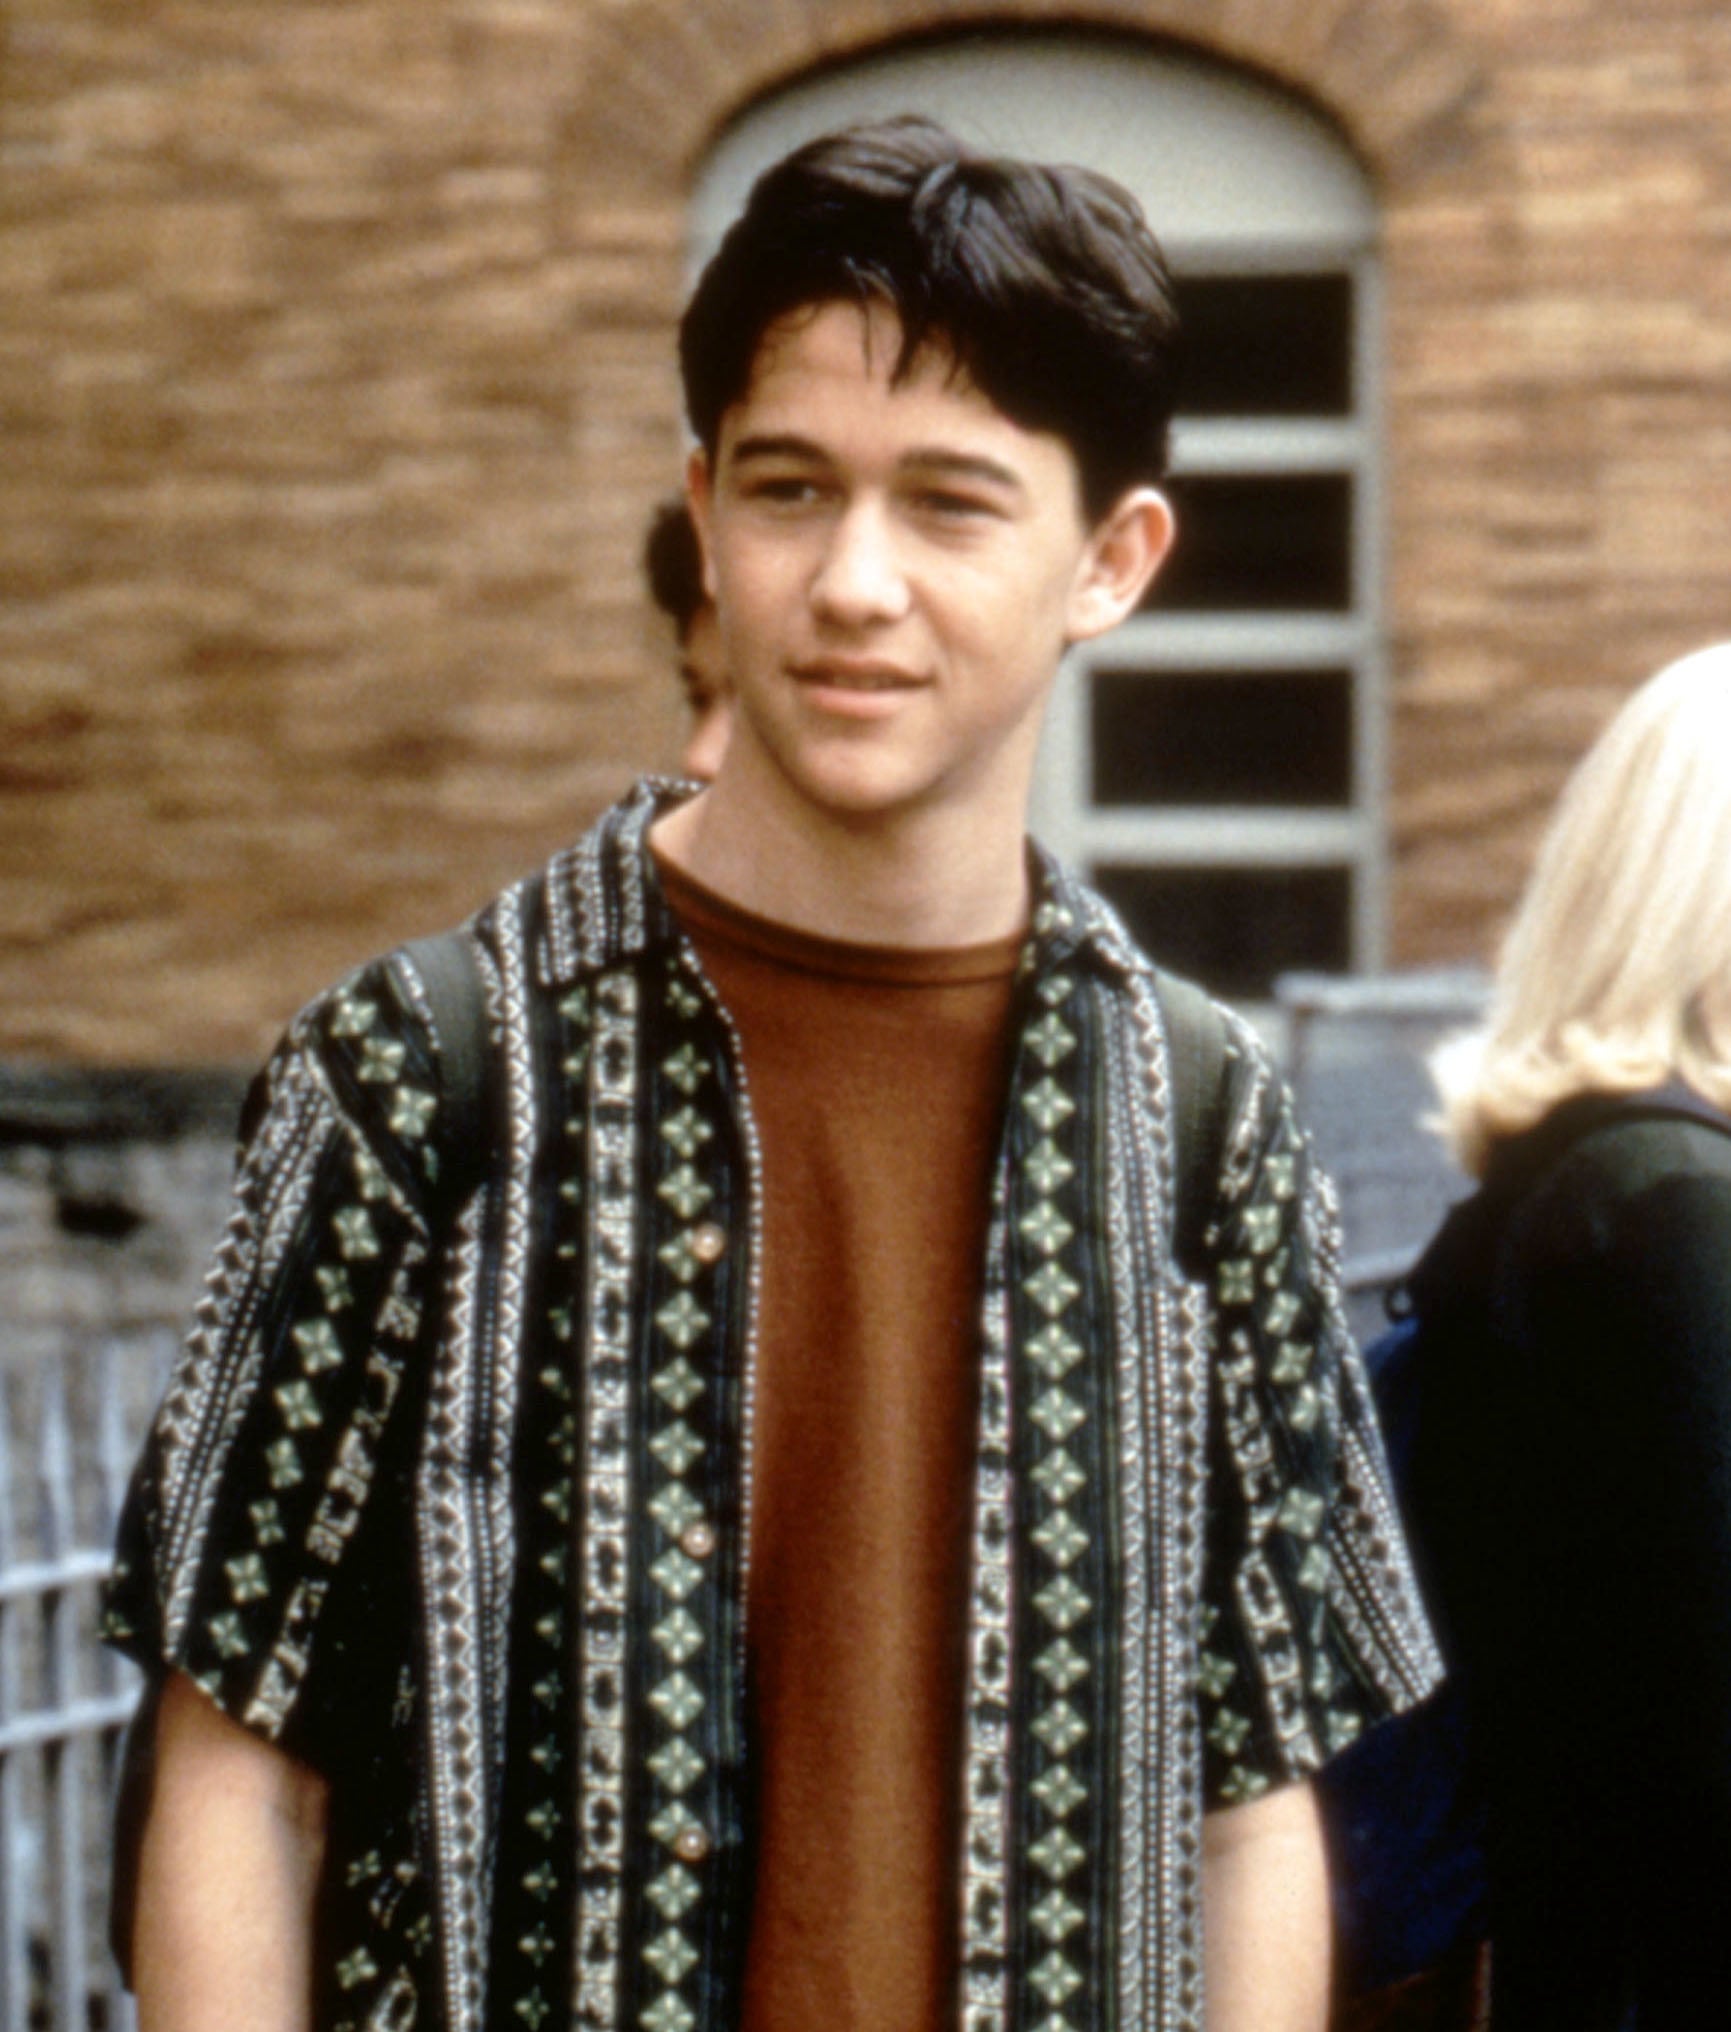 in a scene, Gordon stands in a patterned shirt open over a t-shirt